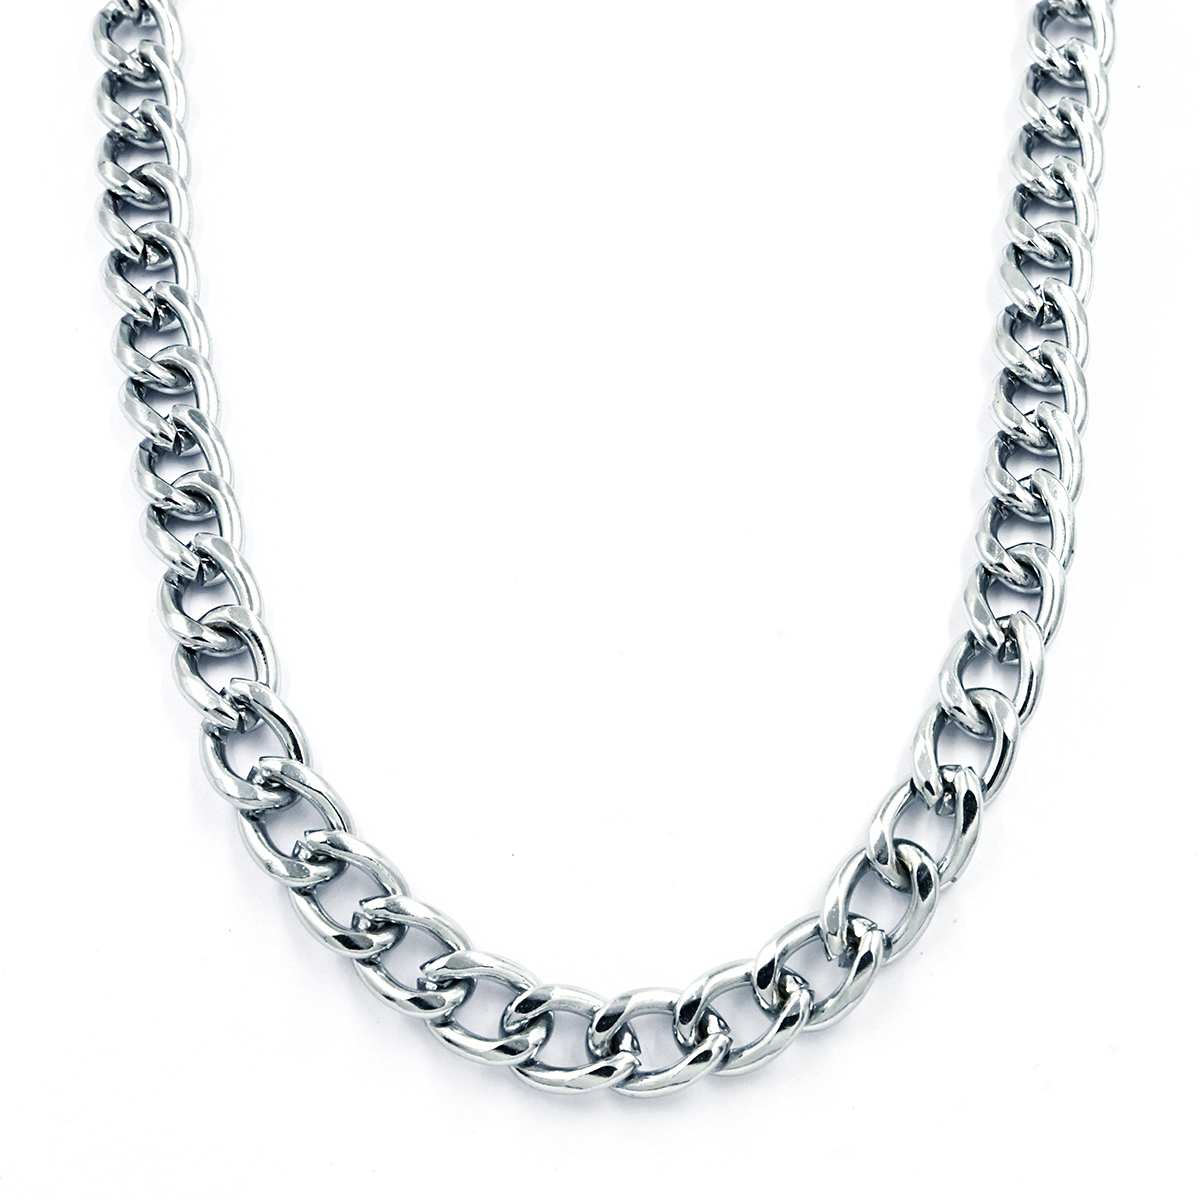 Extra Tough and Heavy Silver-Colored Mens Chain Pendant